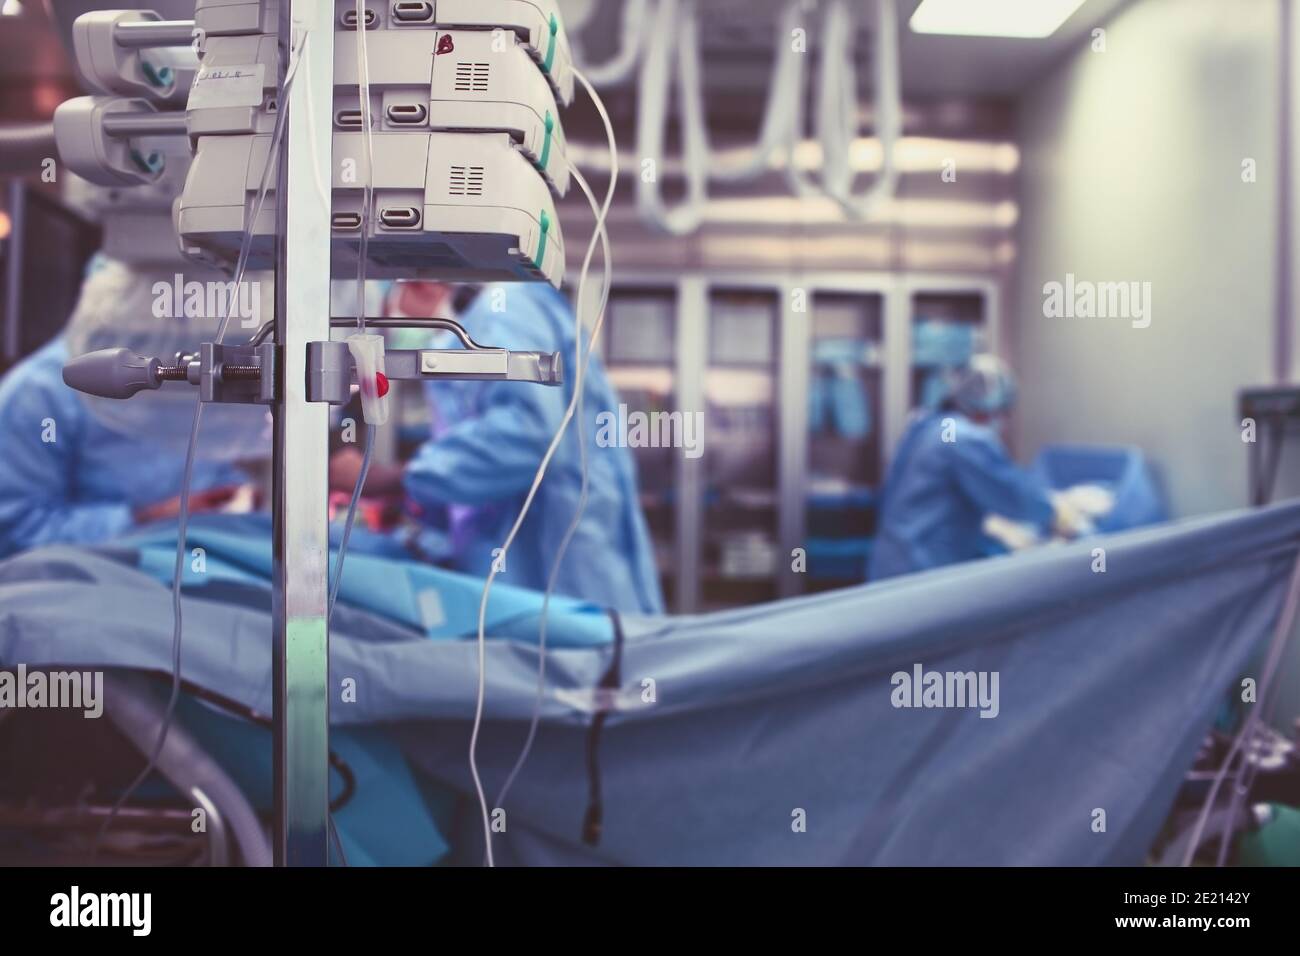 Equipment and doctors view during surgery. Stock Photo